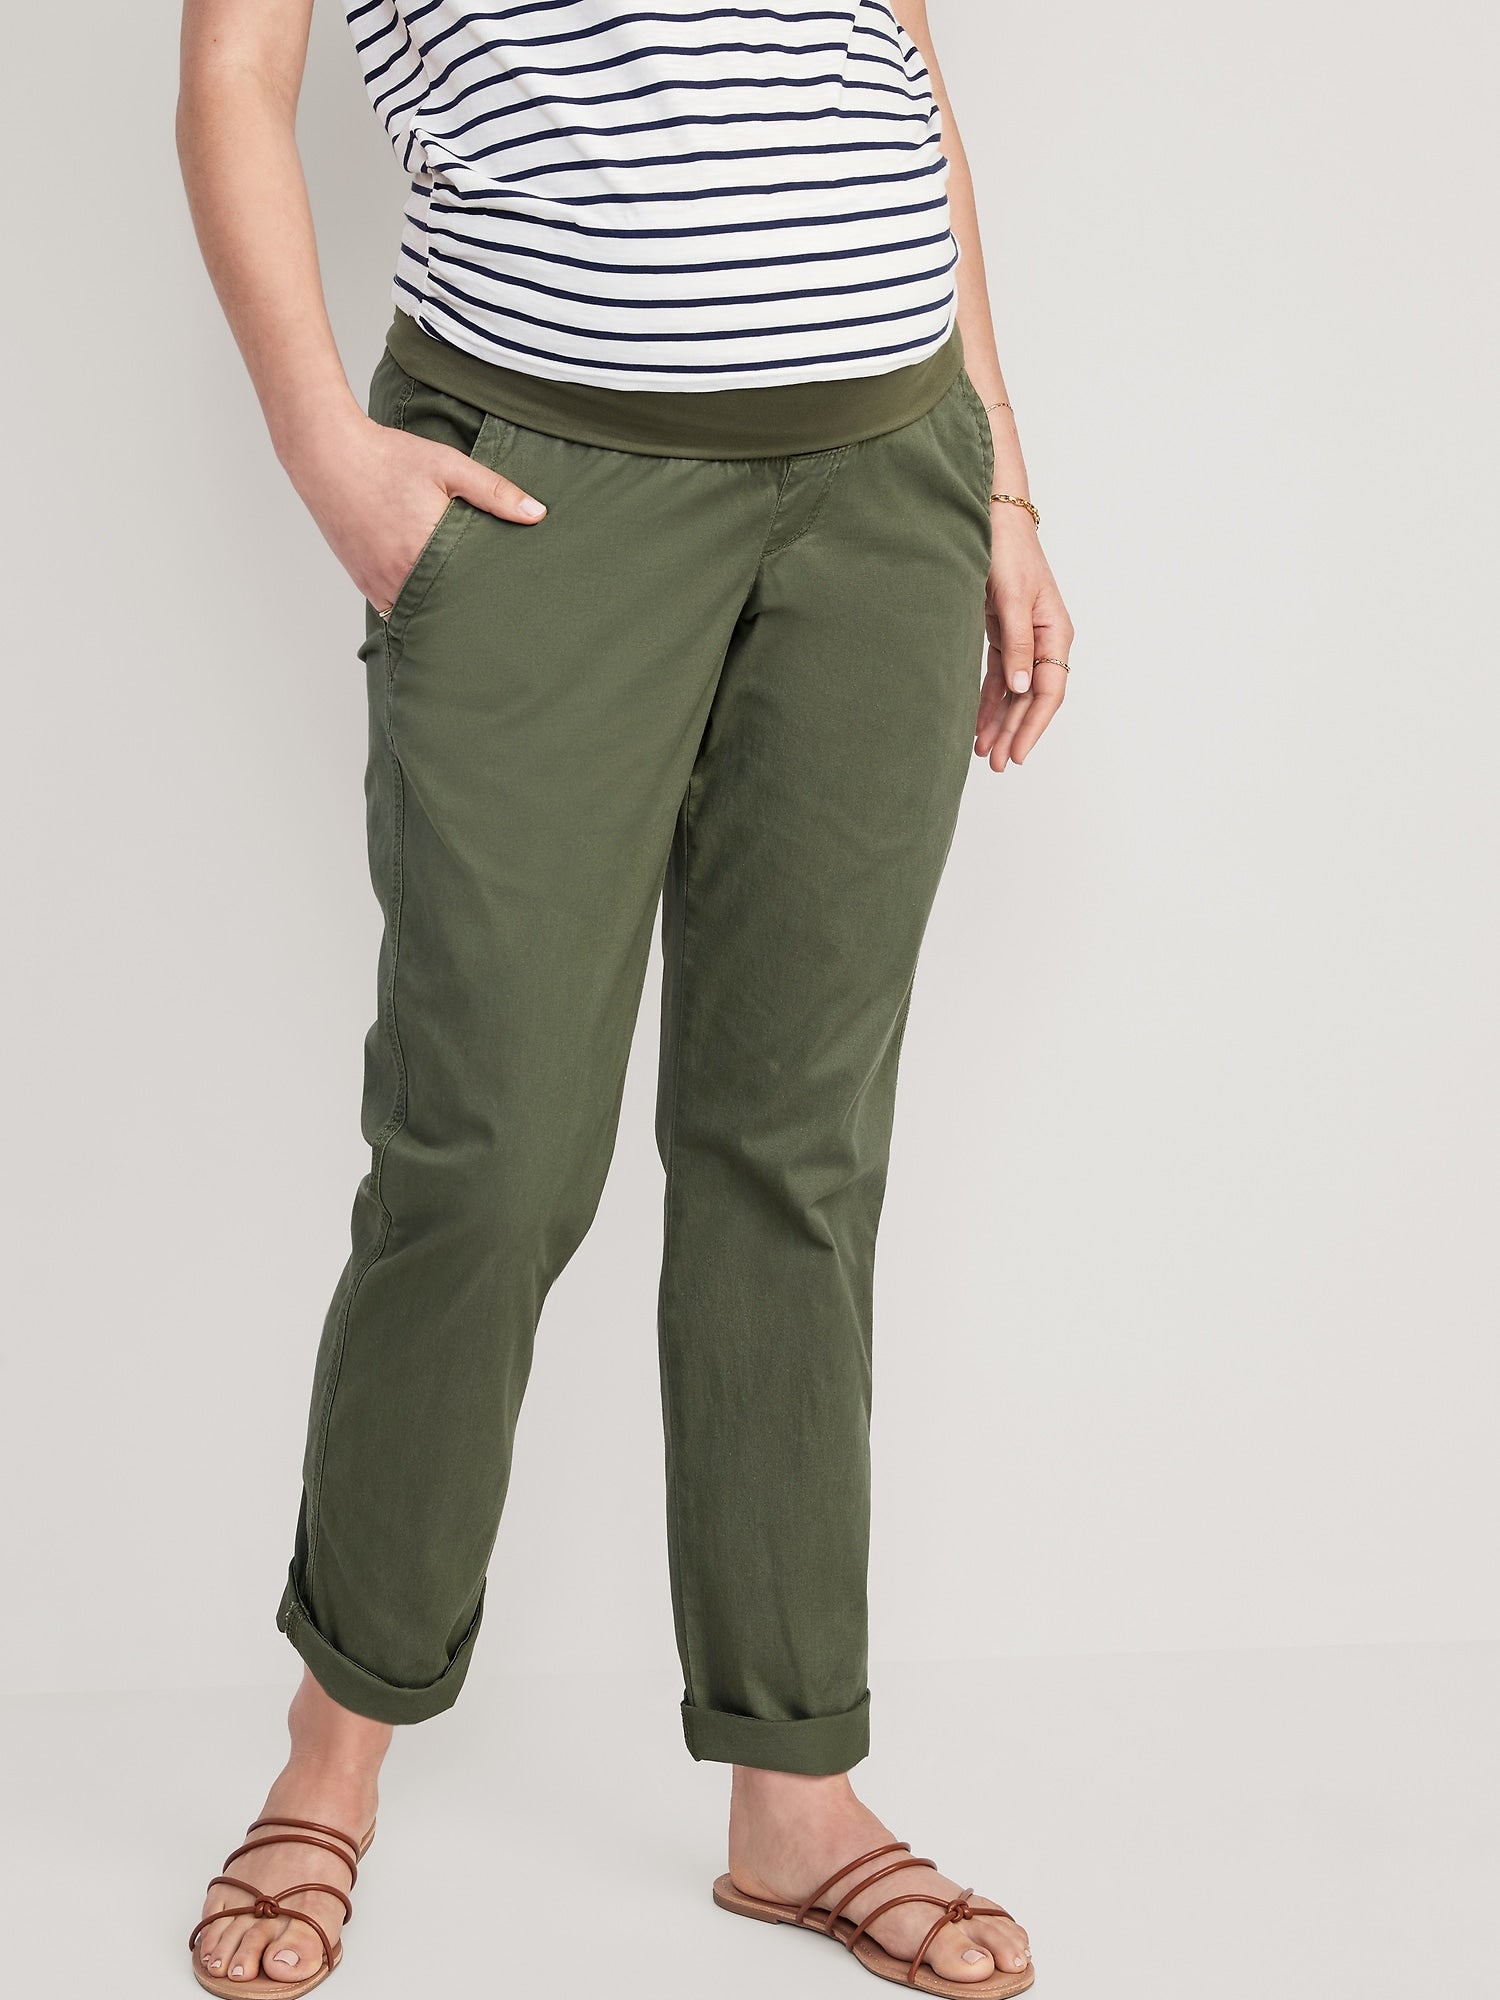 Maternity Bottoms - Old Navy Philippines